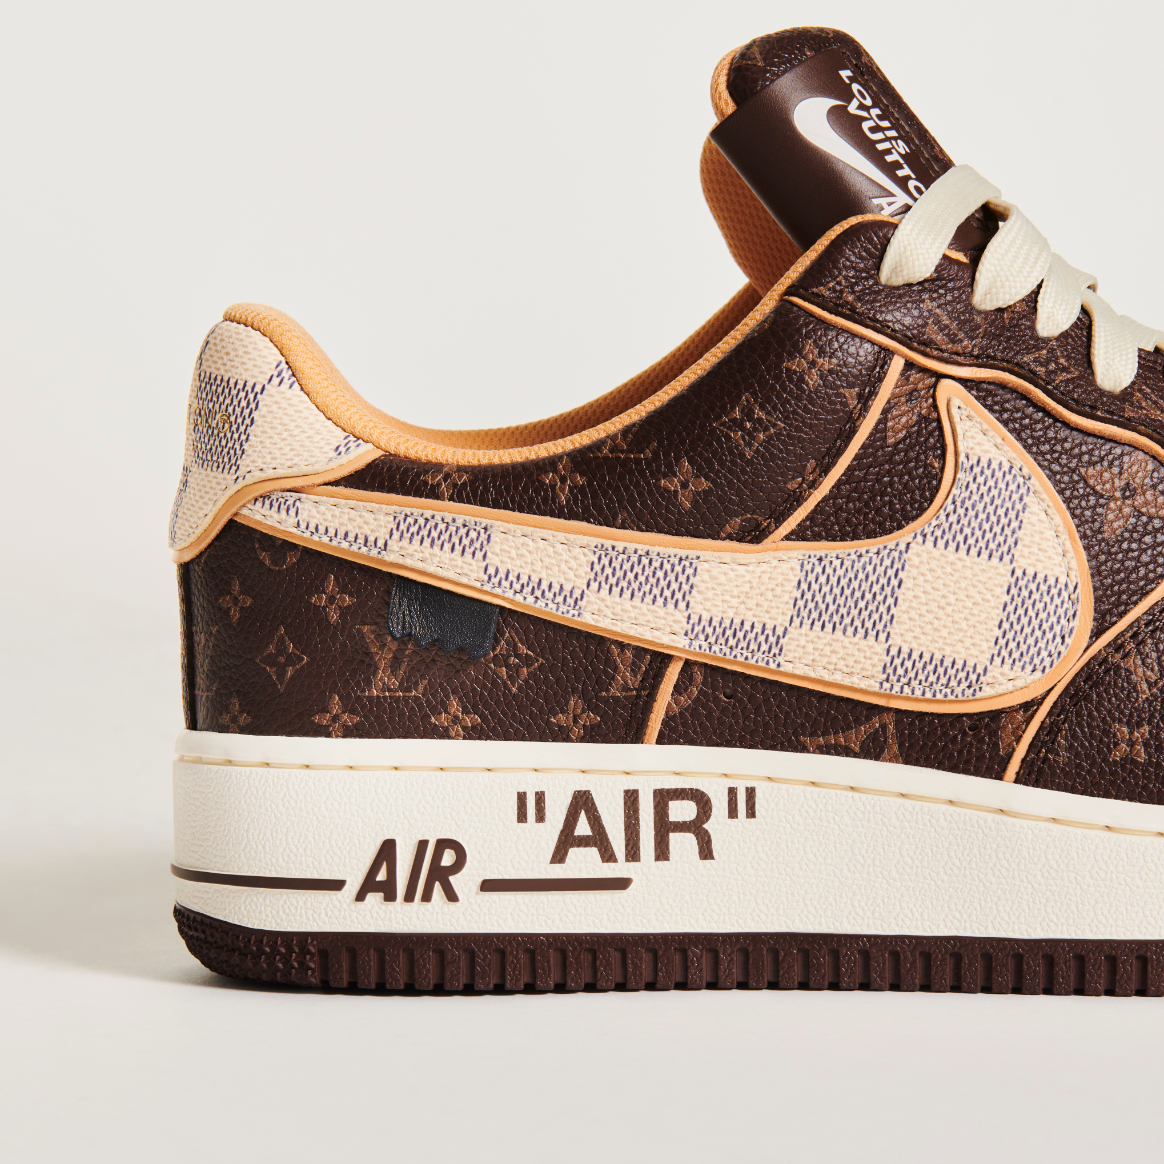 A Whole Bunch Of Louis Vuitton x Nike Air Force 1s Have Been Revealed In  Paris  KicksOnFirecom